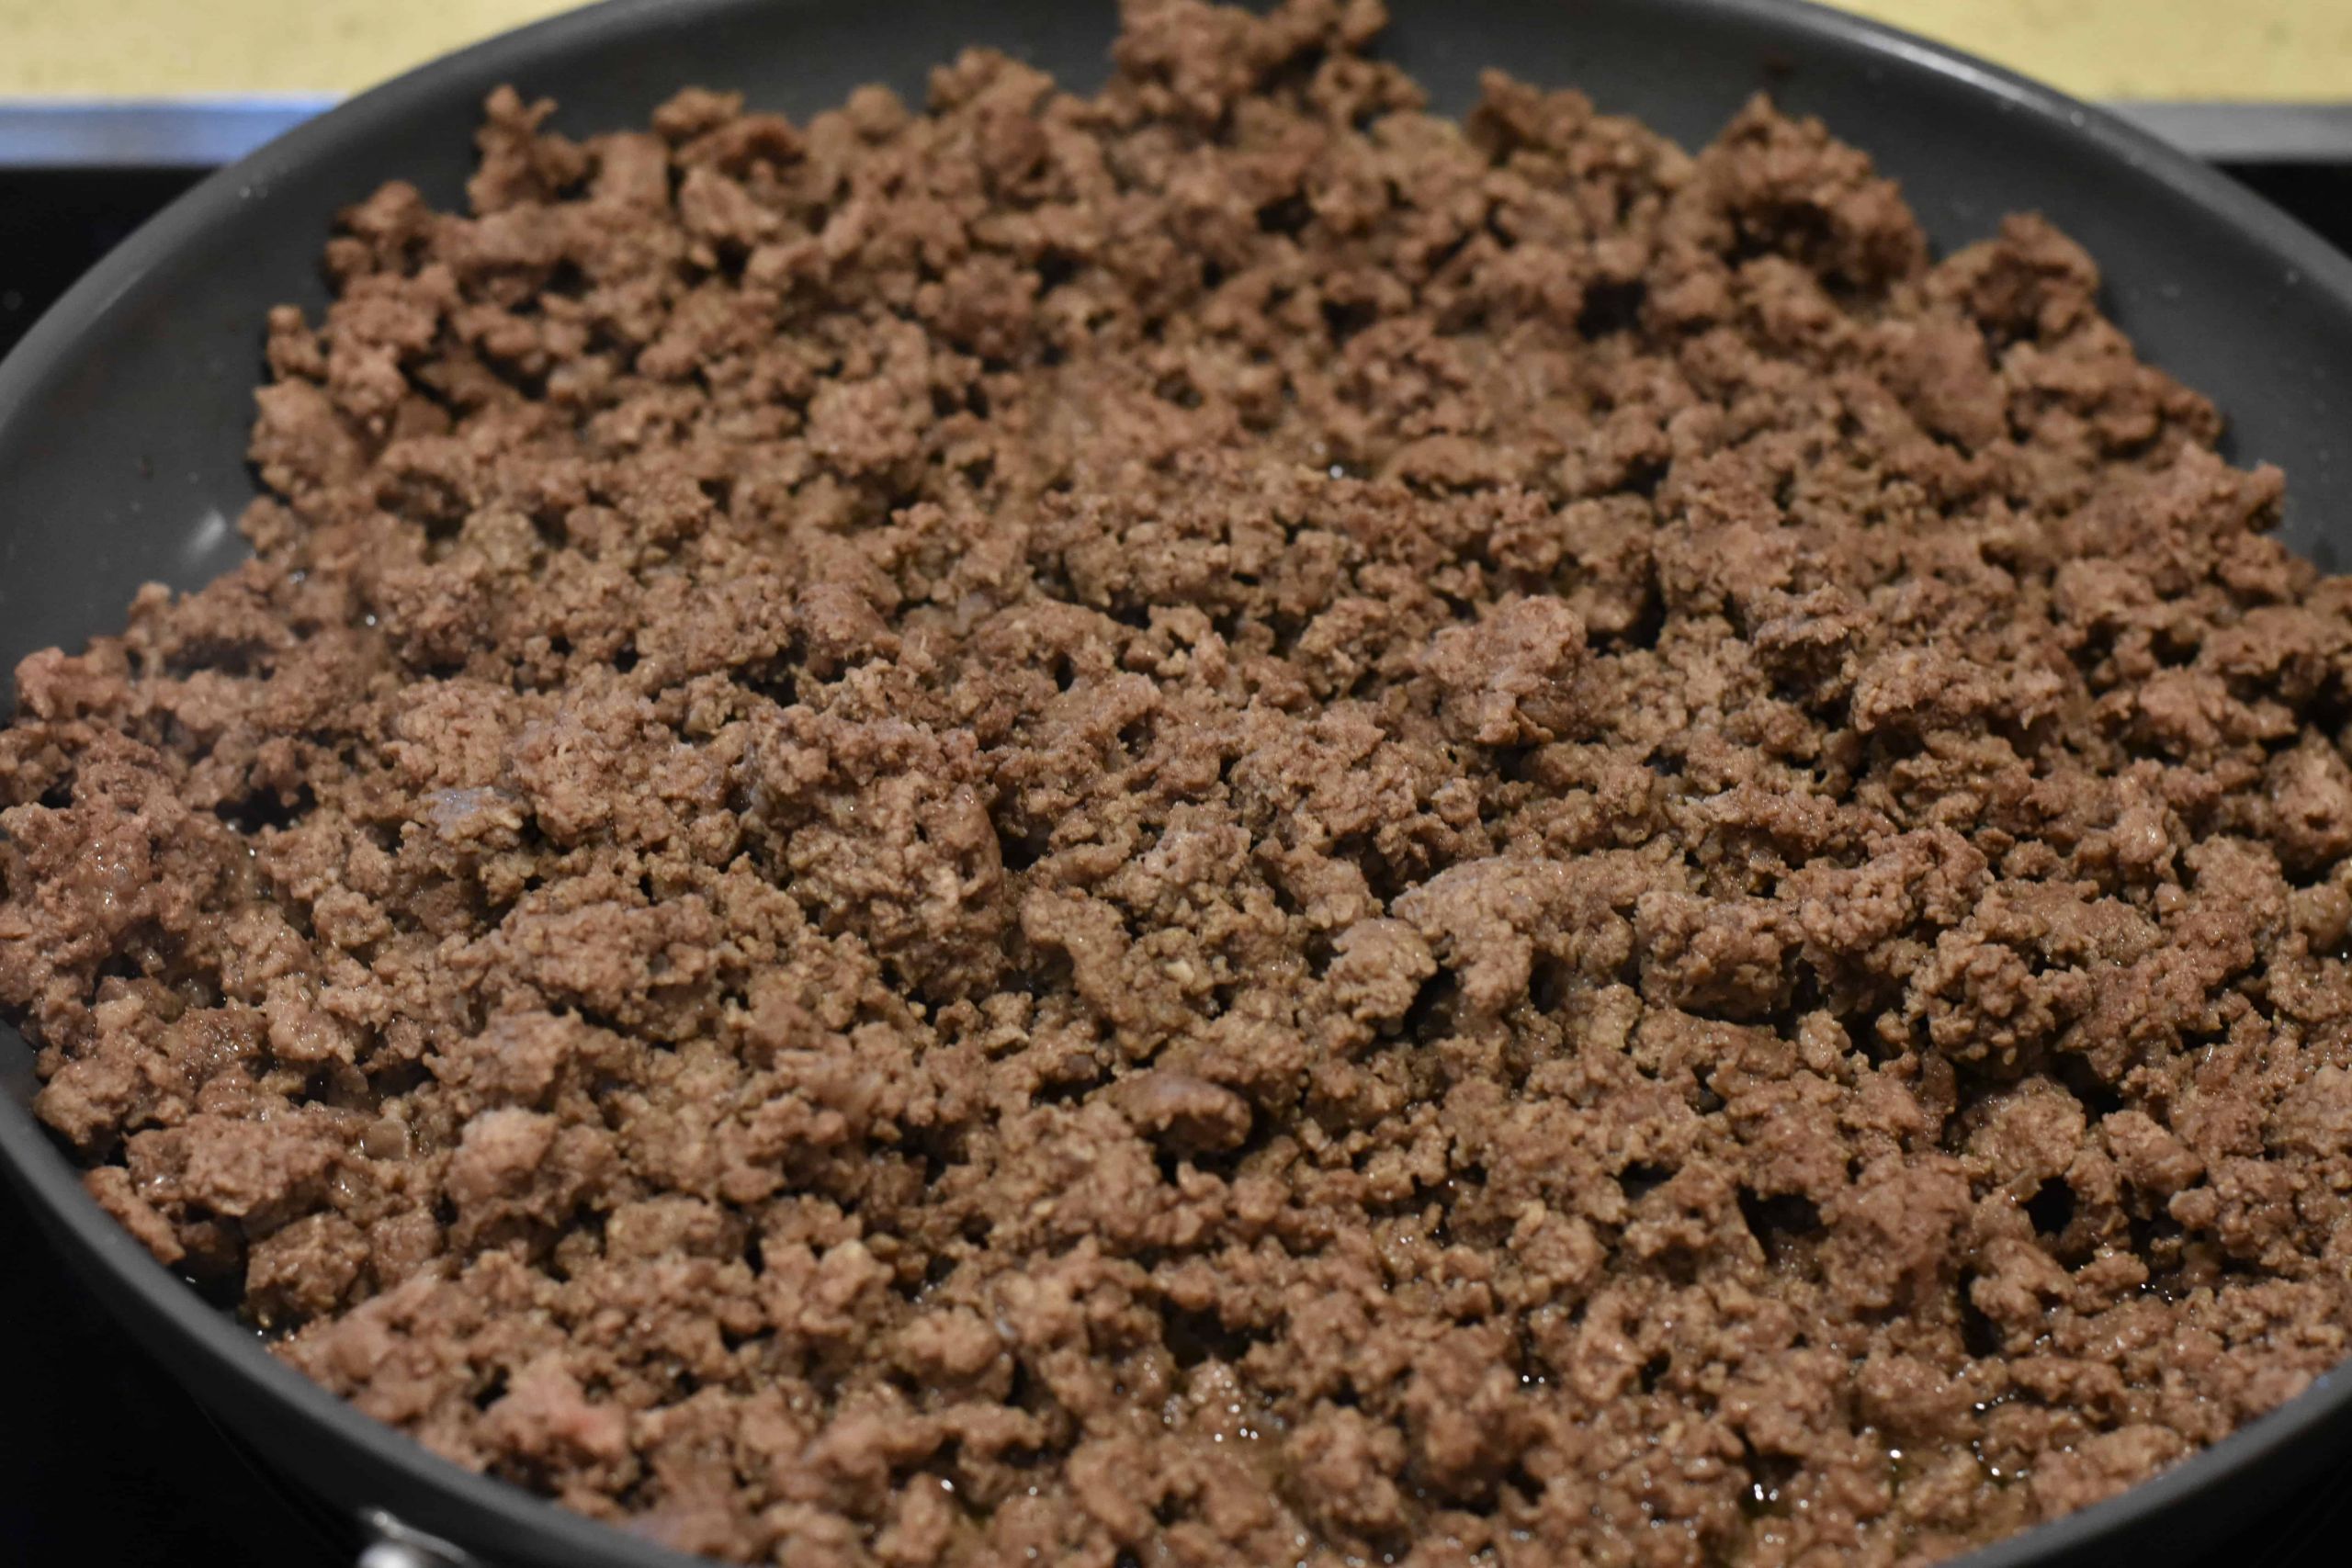 Ground Beef Keto Meal Prep
 Ground Beef Meal Prep